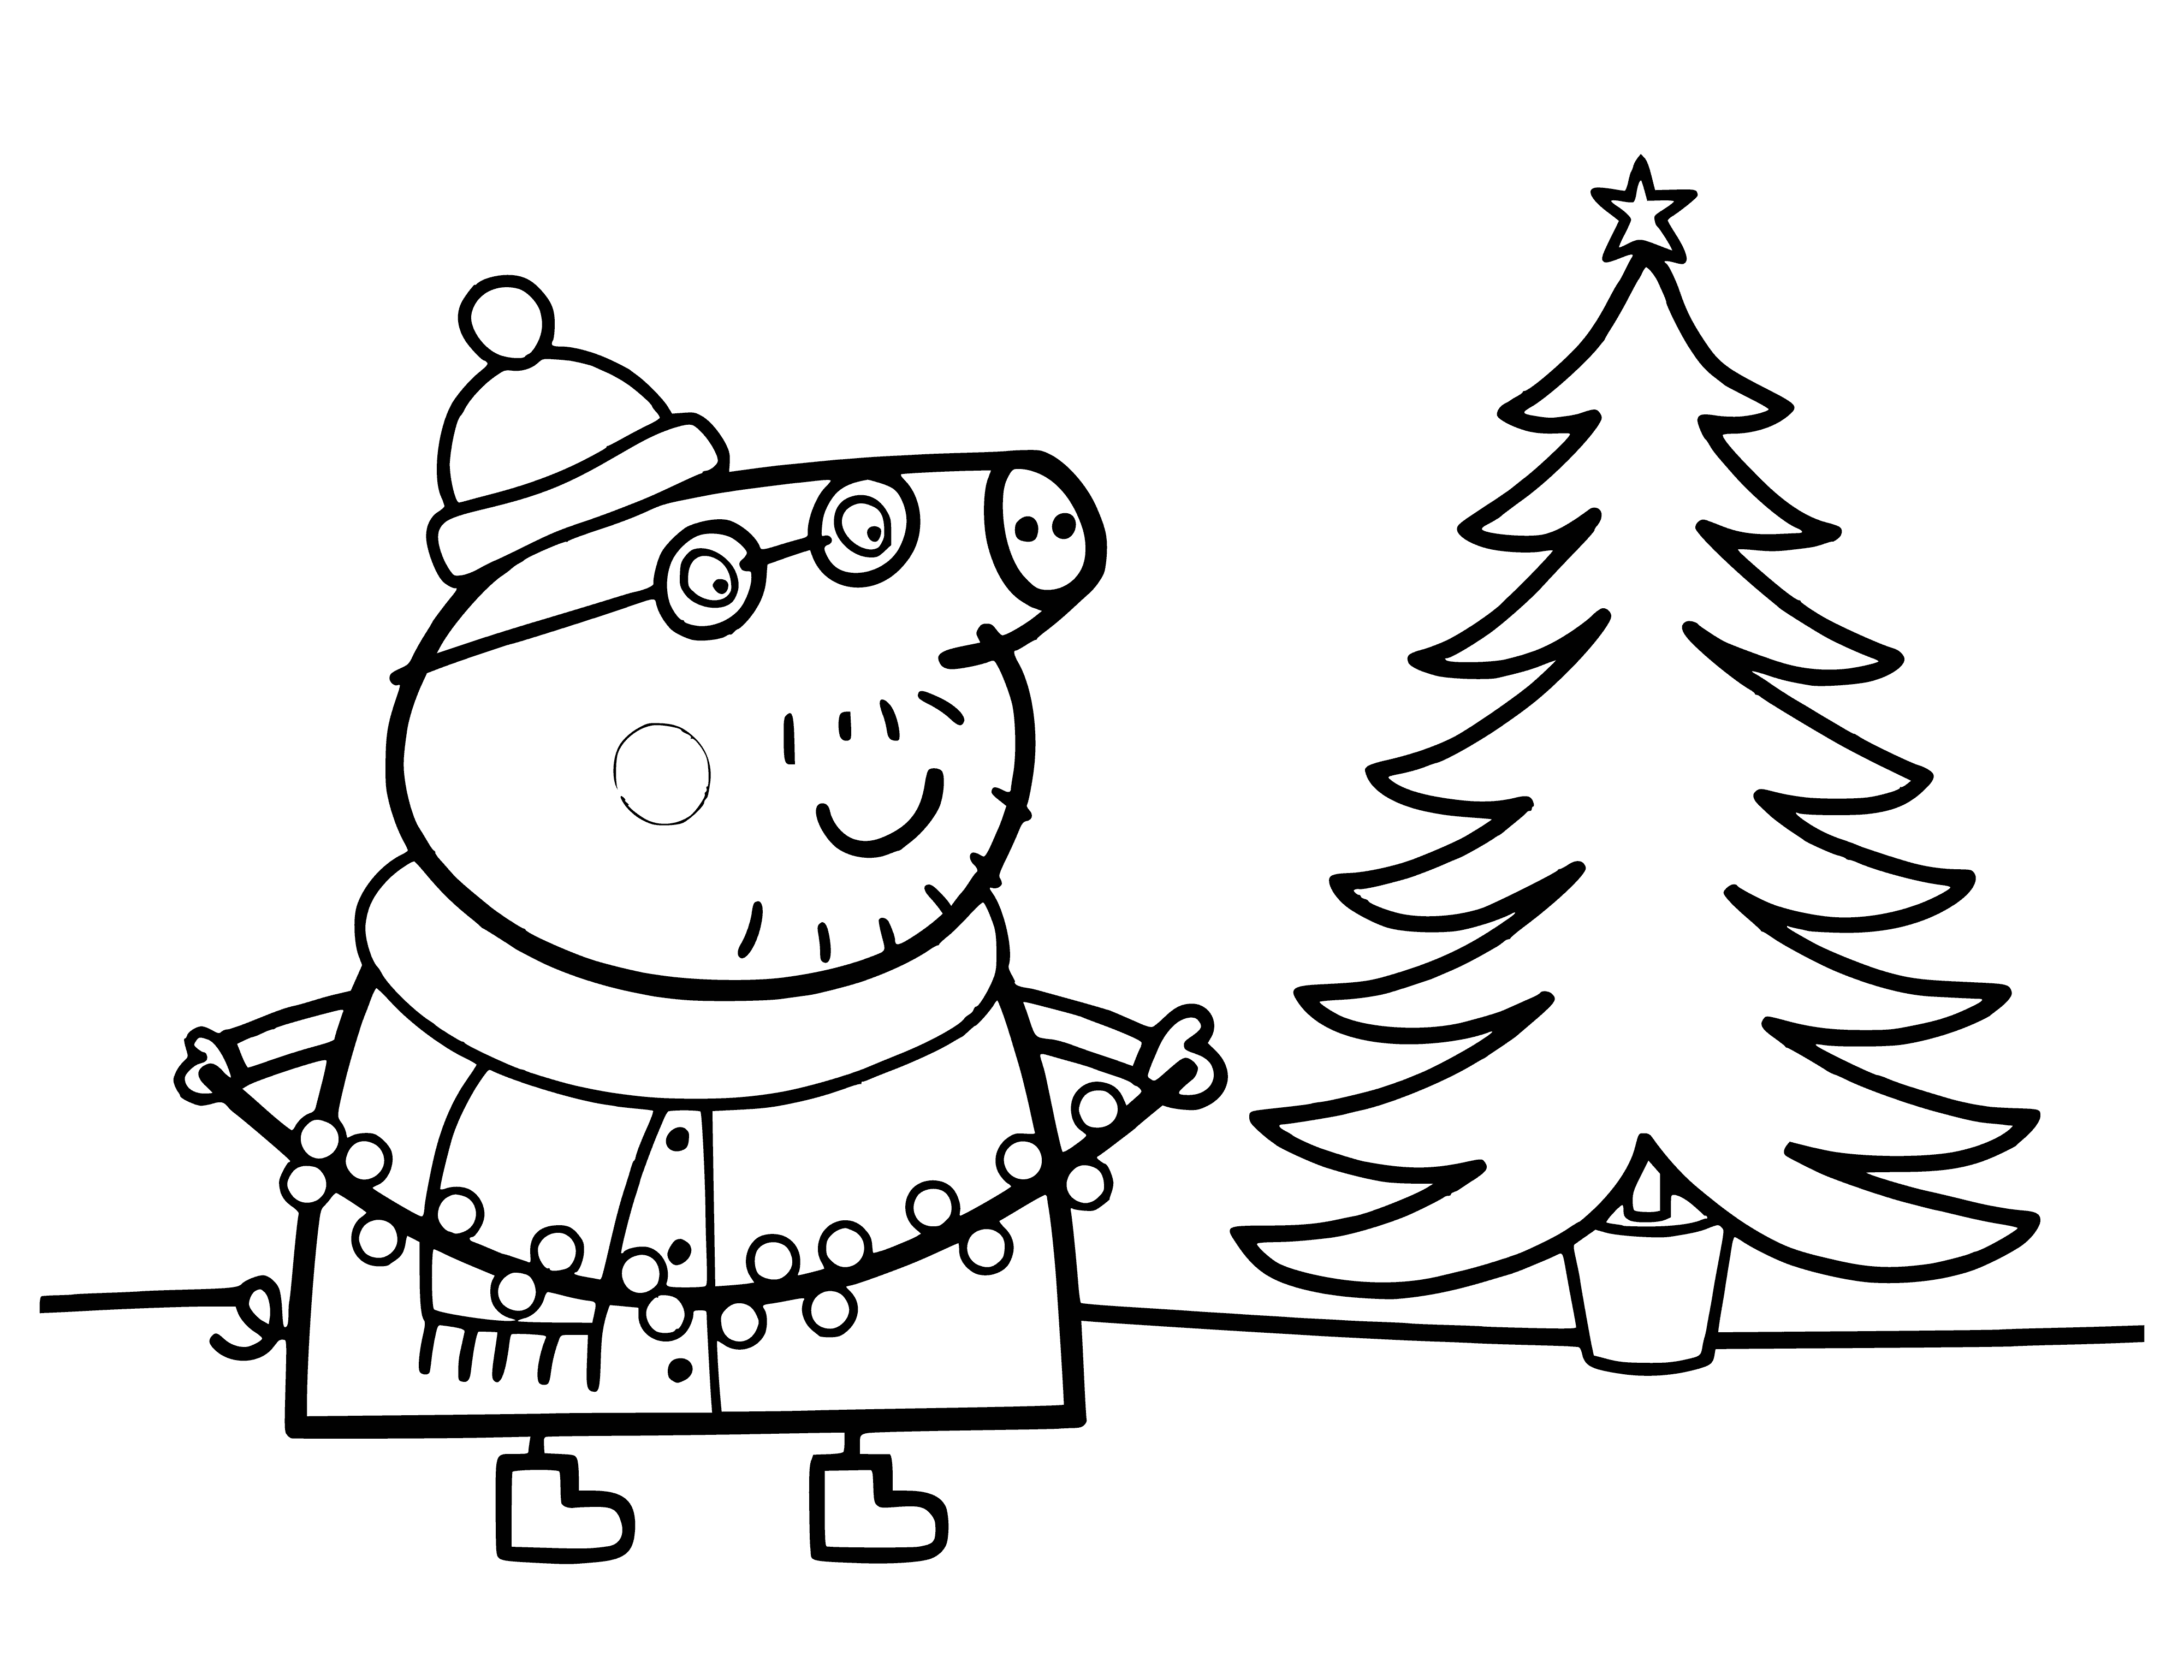 coloring page: Father Pig decorates the Christmas tree as the fire crackles in the fireplace and the wreath happily hangs on the mantel.